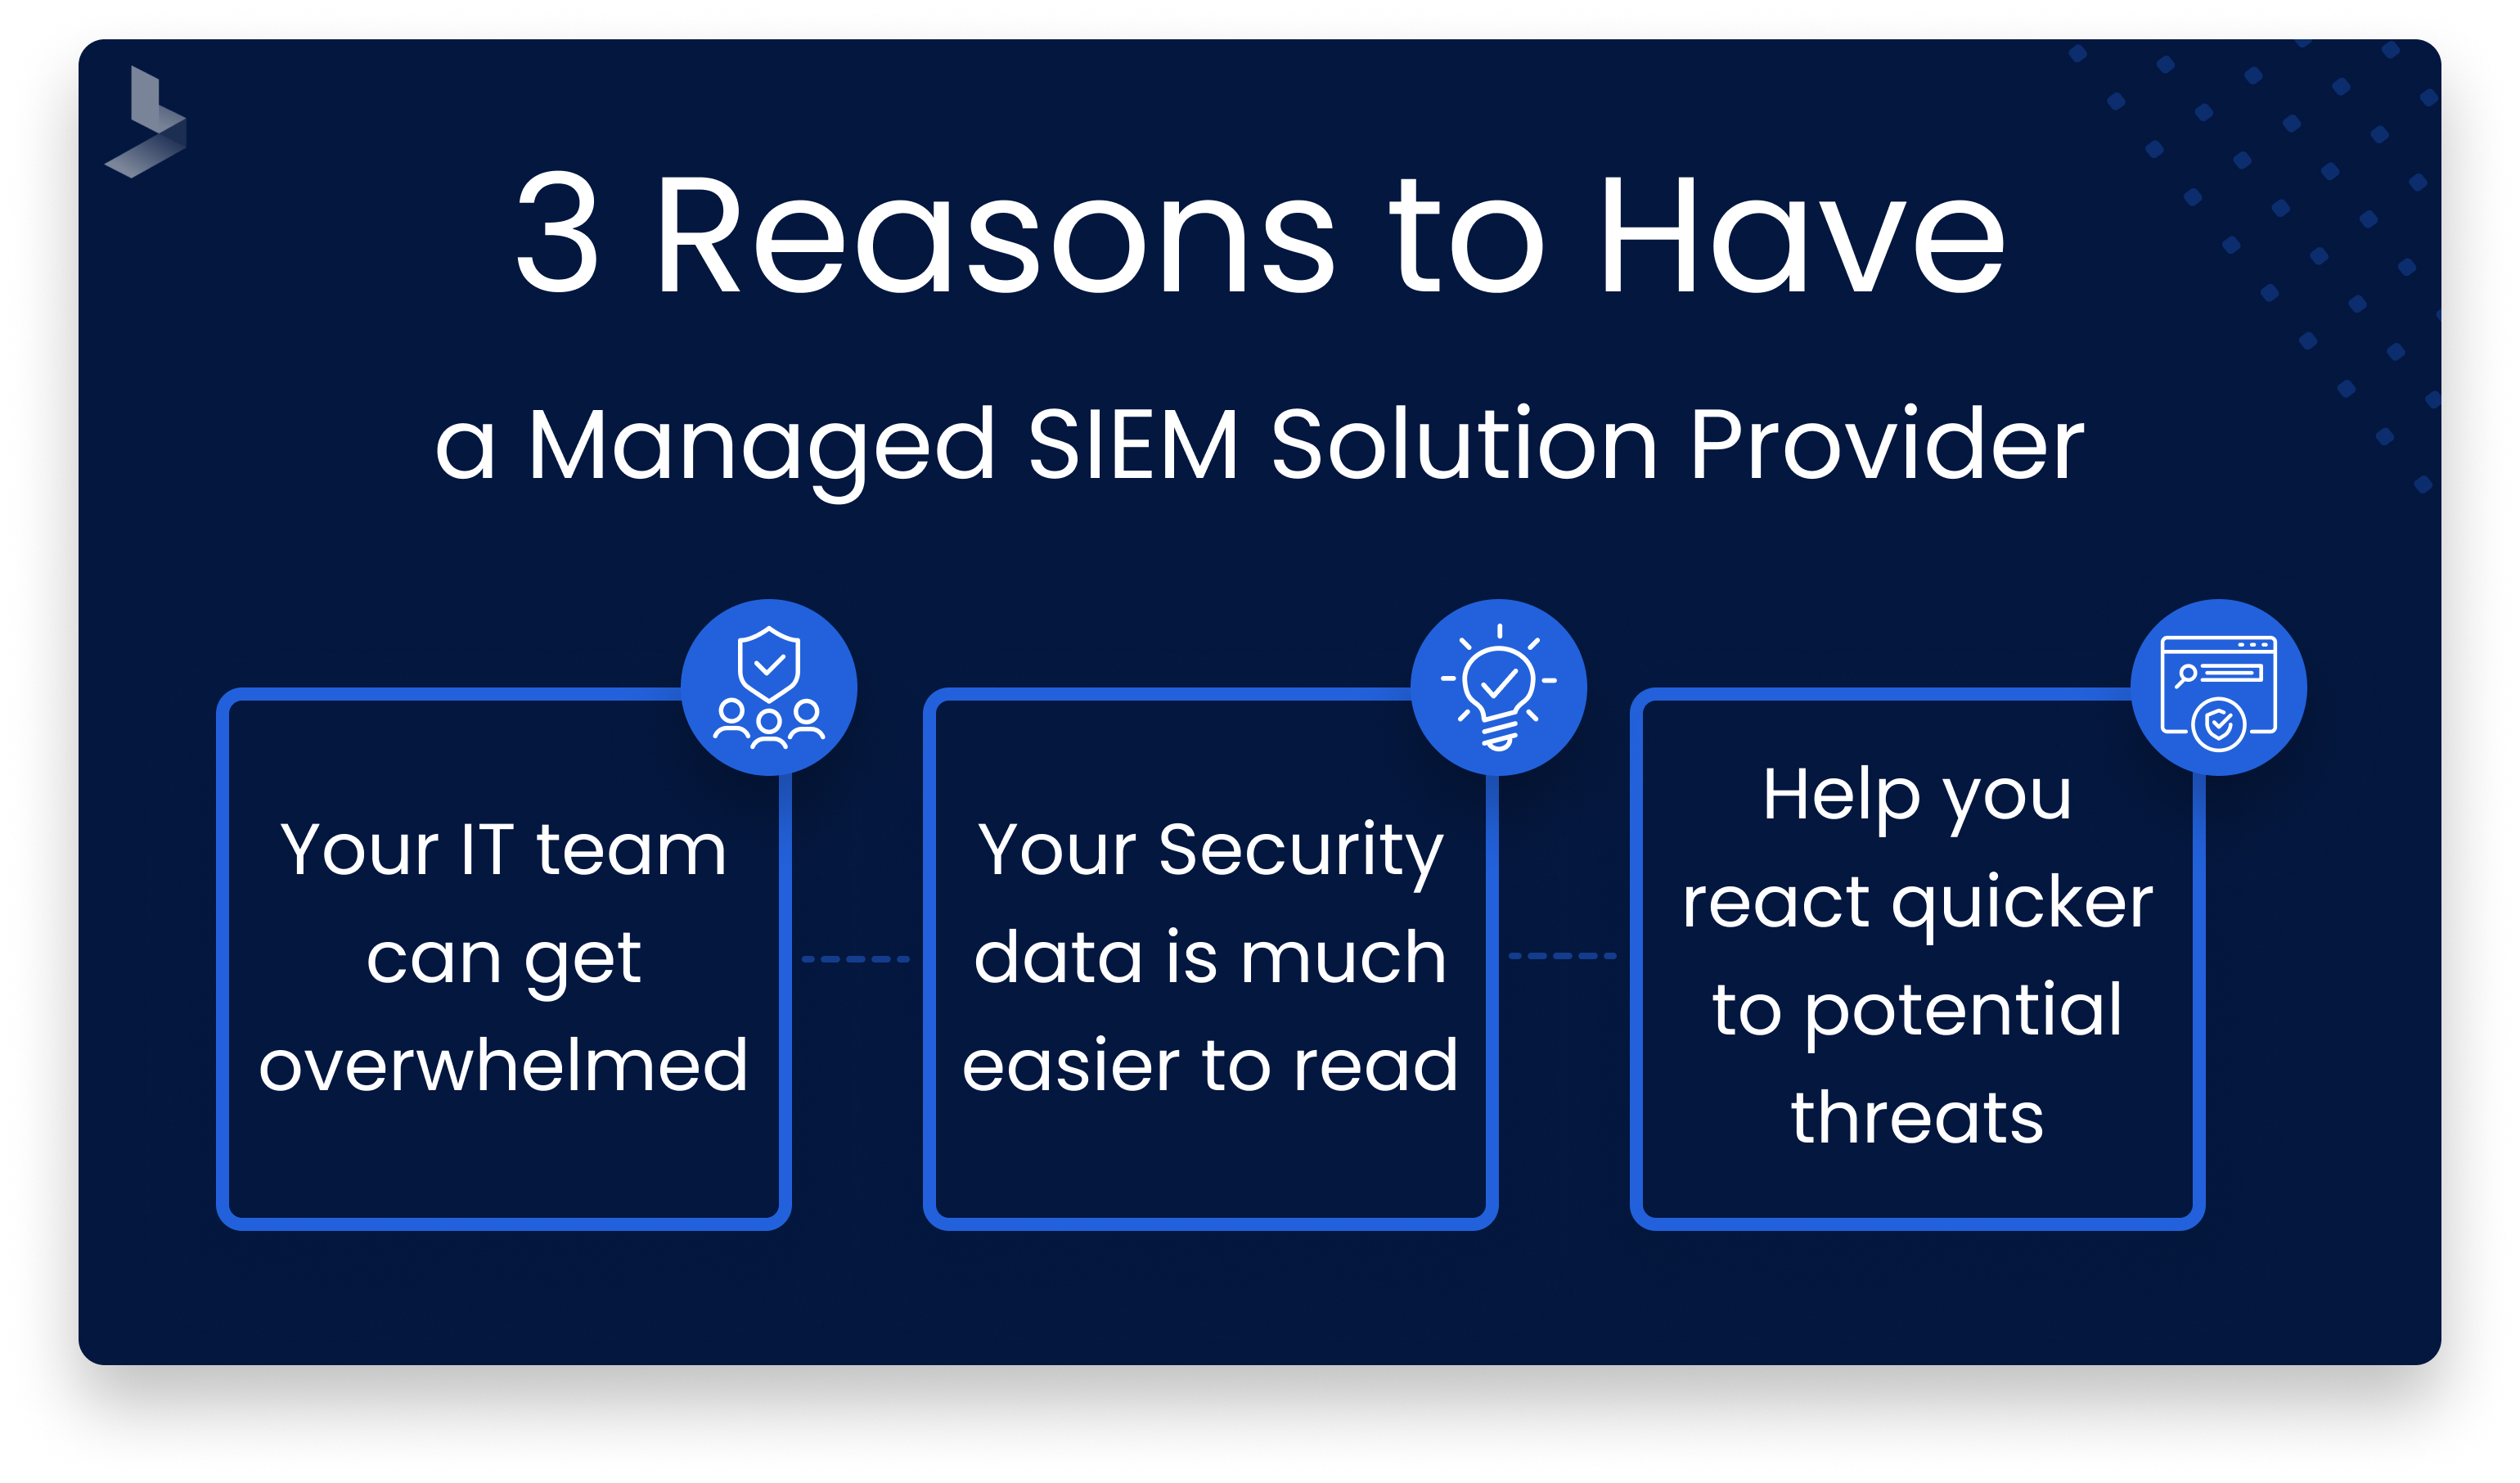 3 Reasons to have Managed SiEM Solution Providers